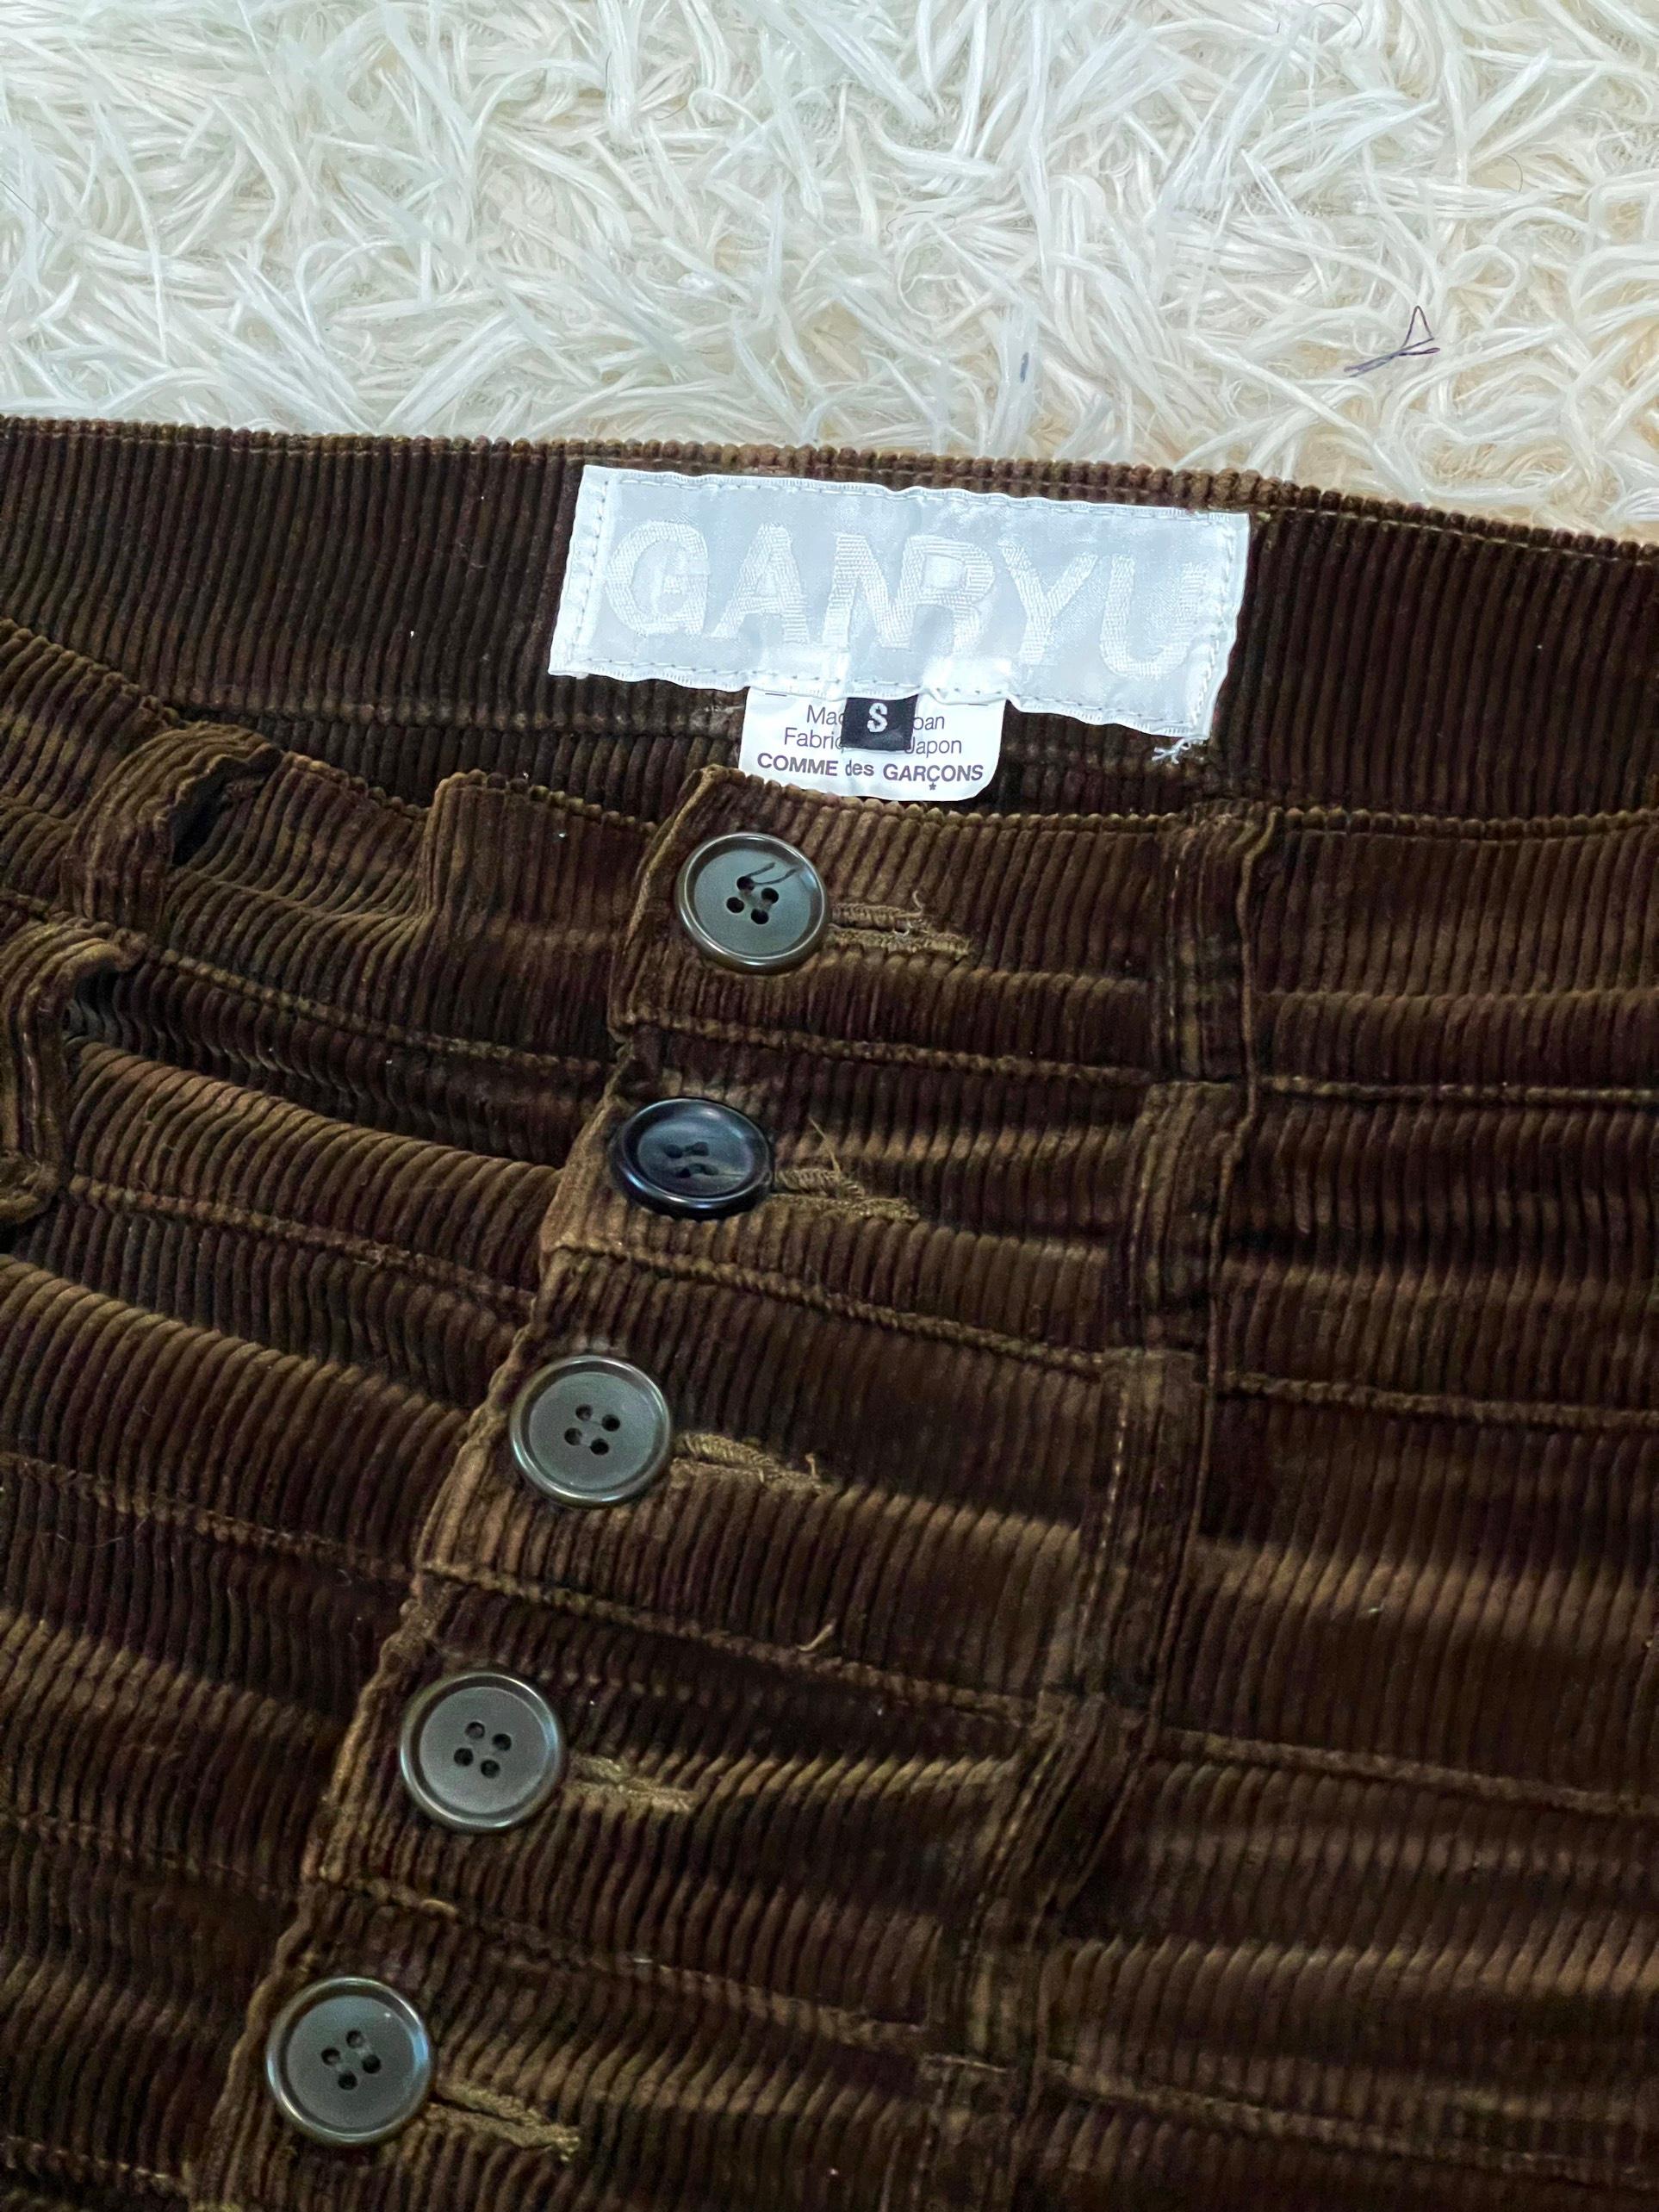  Ganryu pants with stacked belt loop, in corduroy texture.

Size: S, fits 29-30.

Condition: Like new with no flaws.

Feels free to message me with any questions regarding inquiries.
